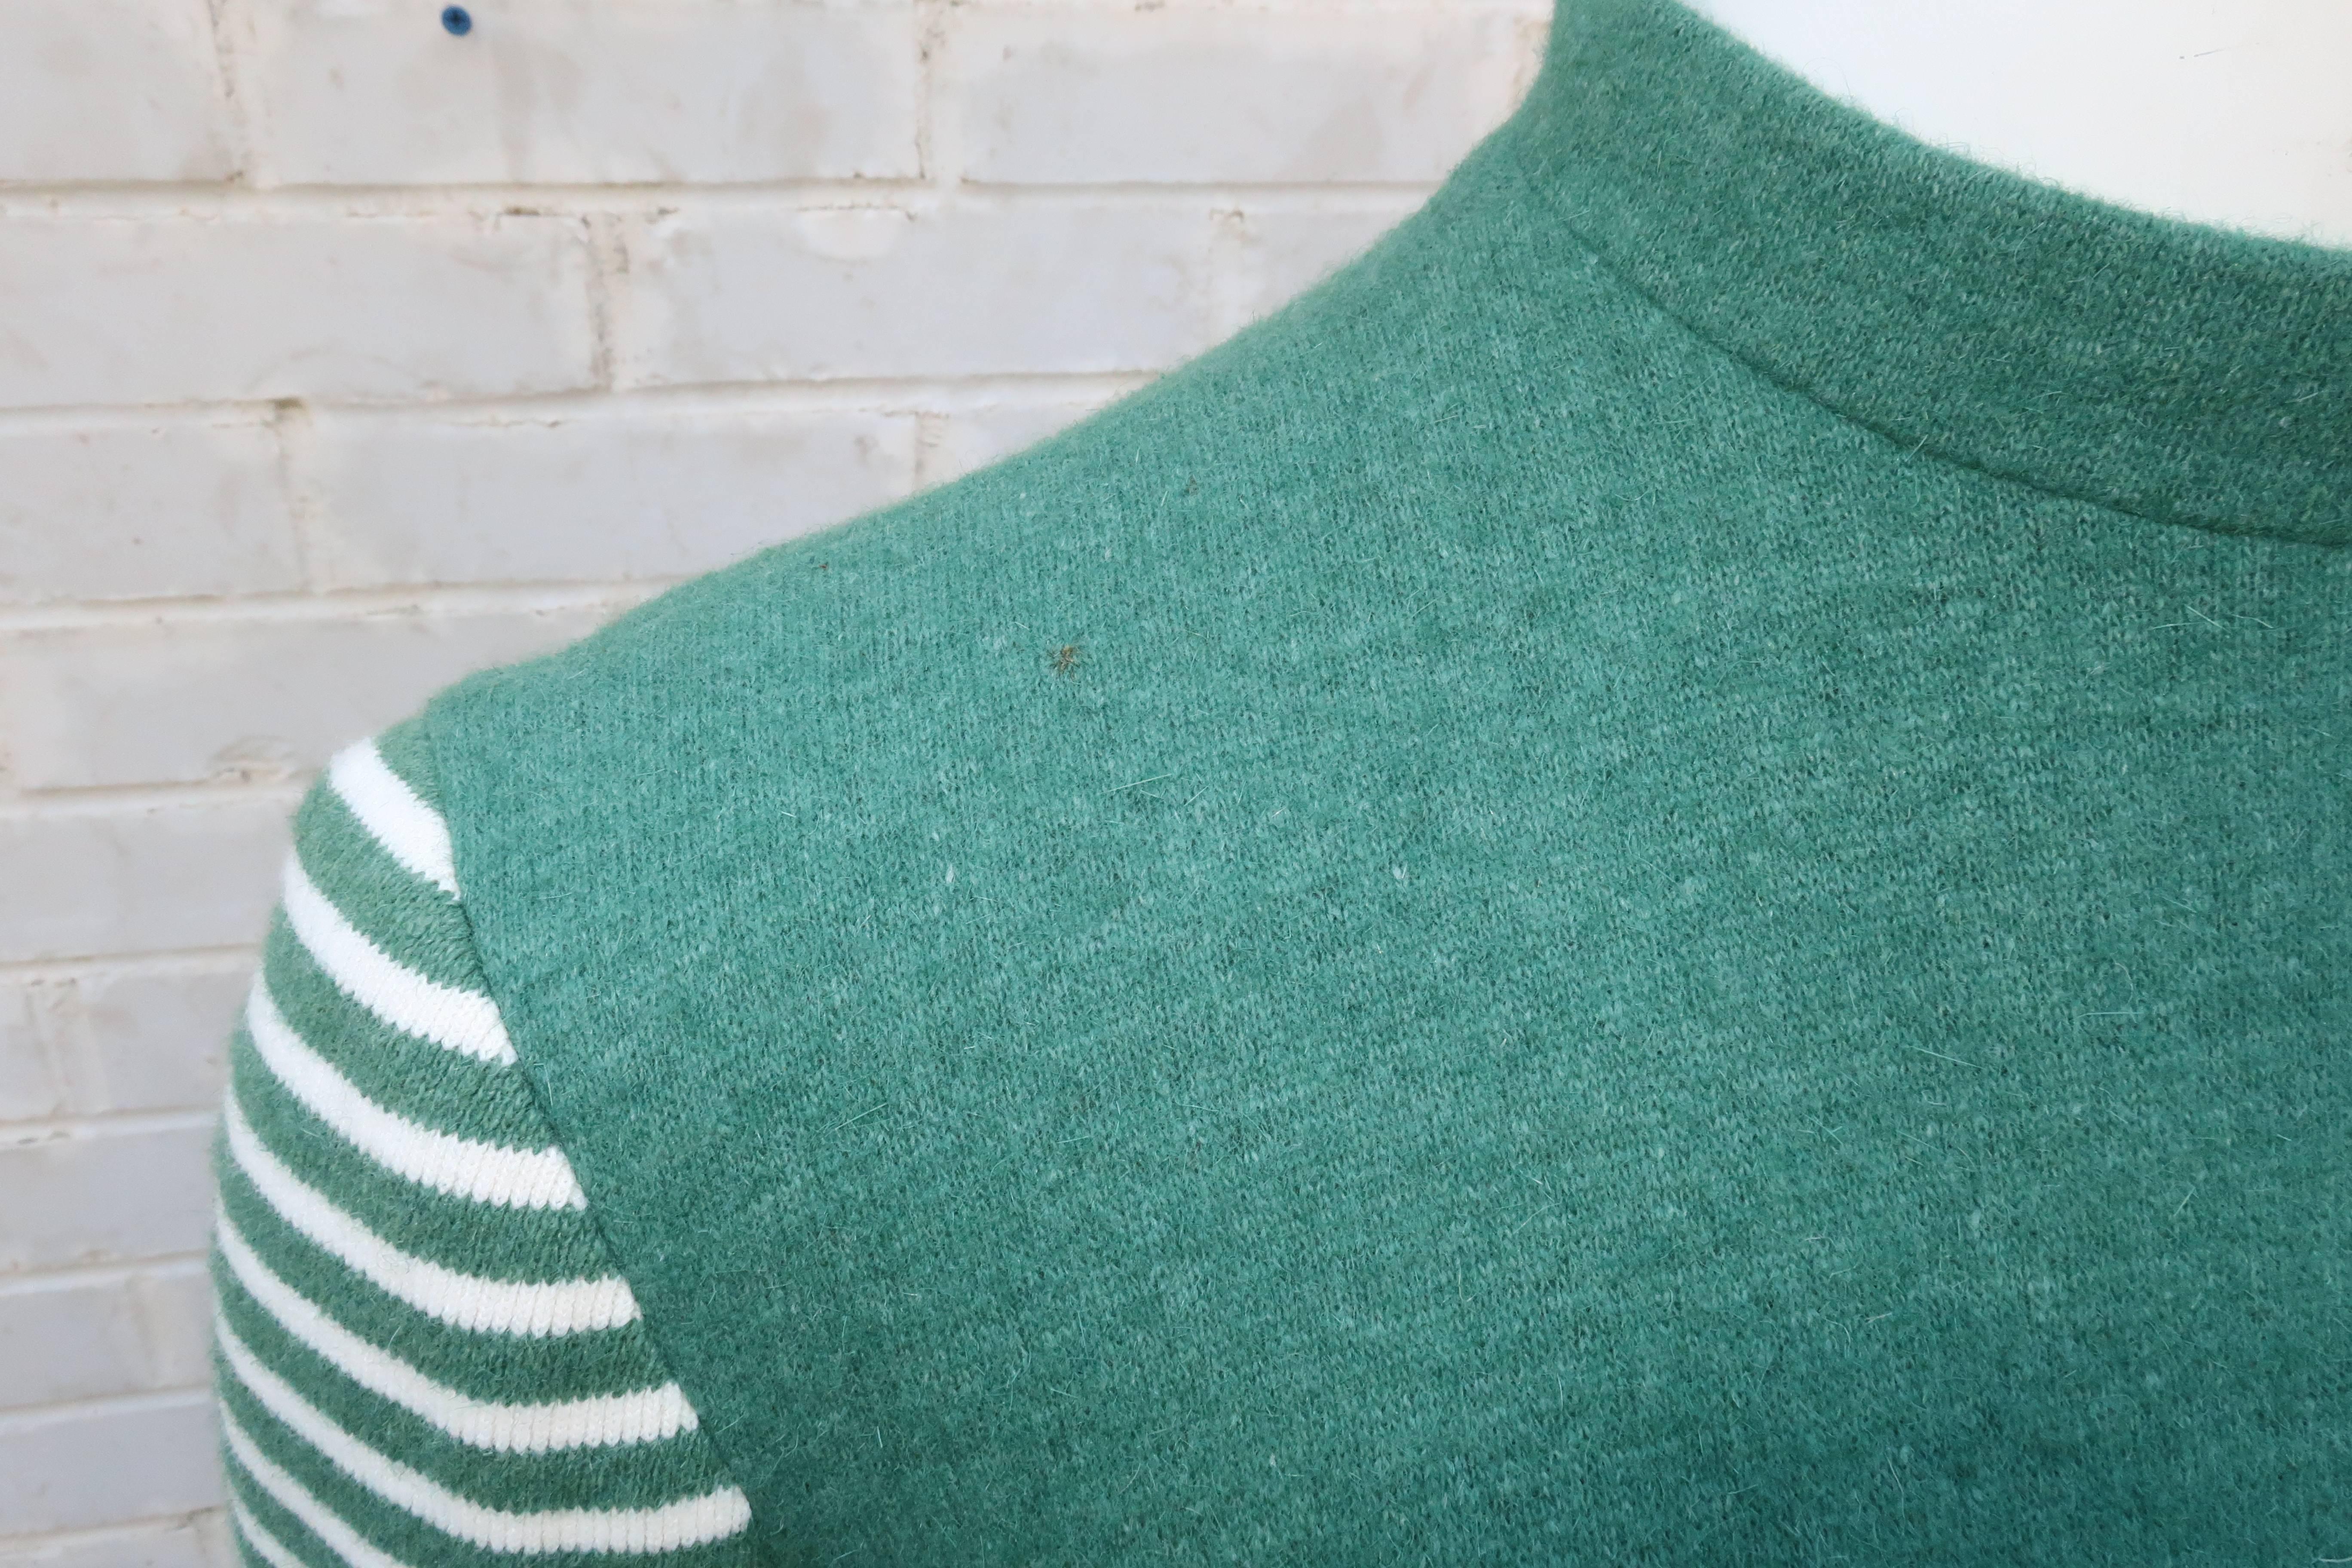 Adorable 1950's Anne Fogarty Green & White Wool Sweater Dress 2